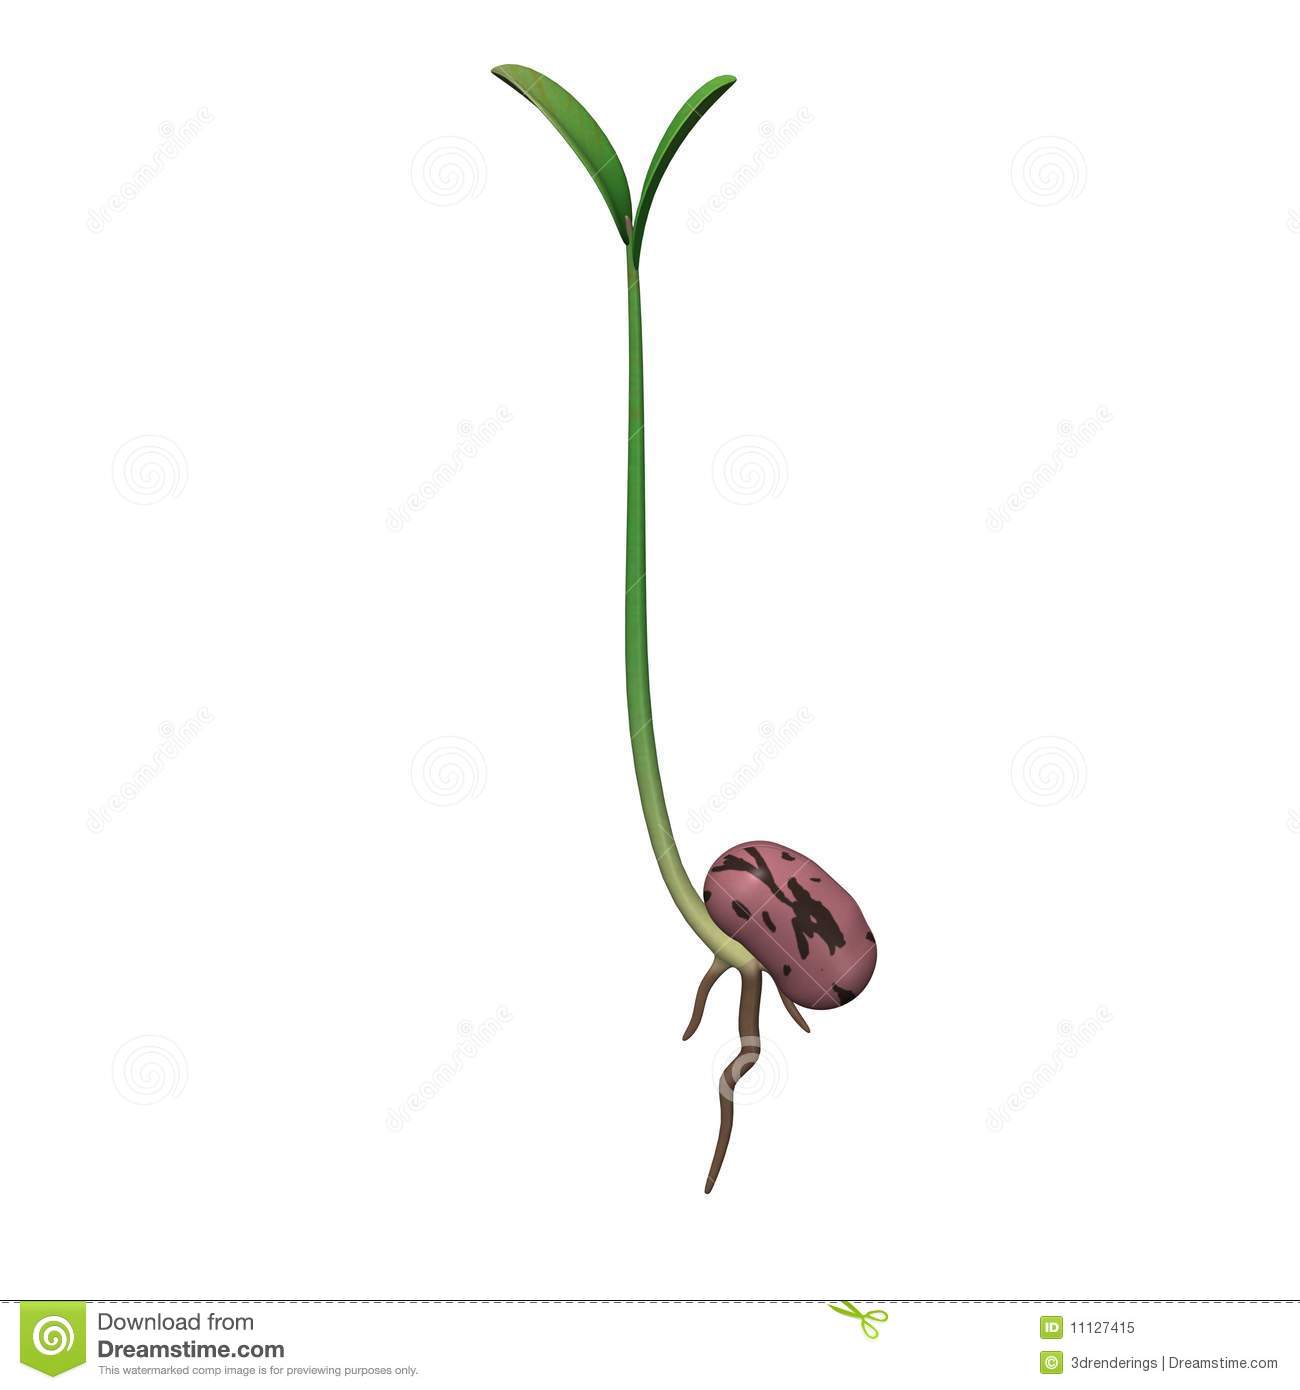 Growing Seed Royalty Free Stock Photo   Image  11127415